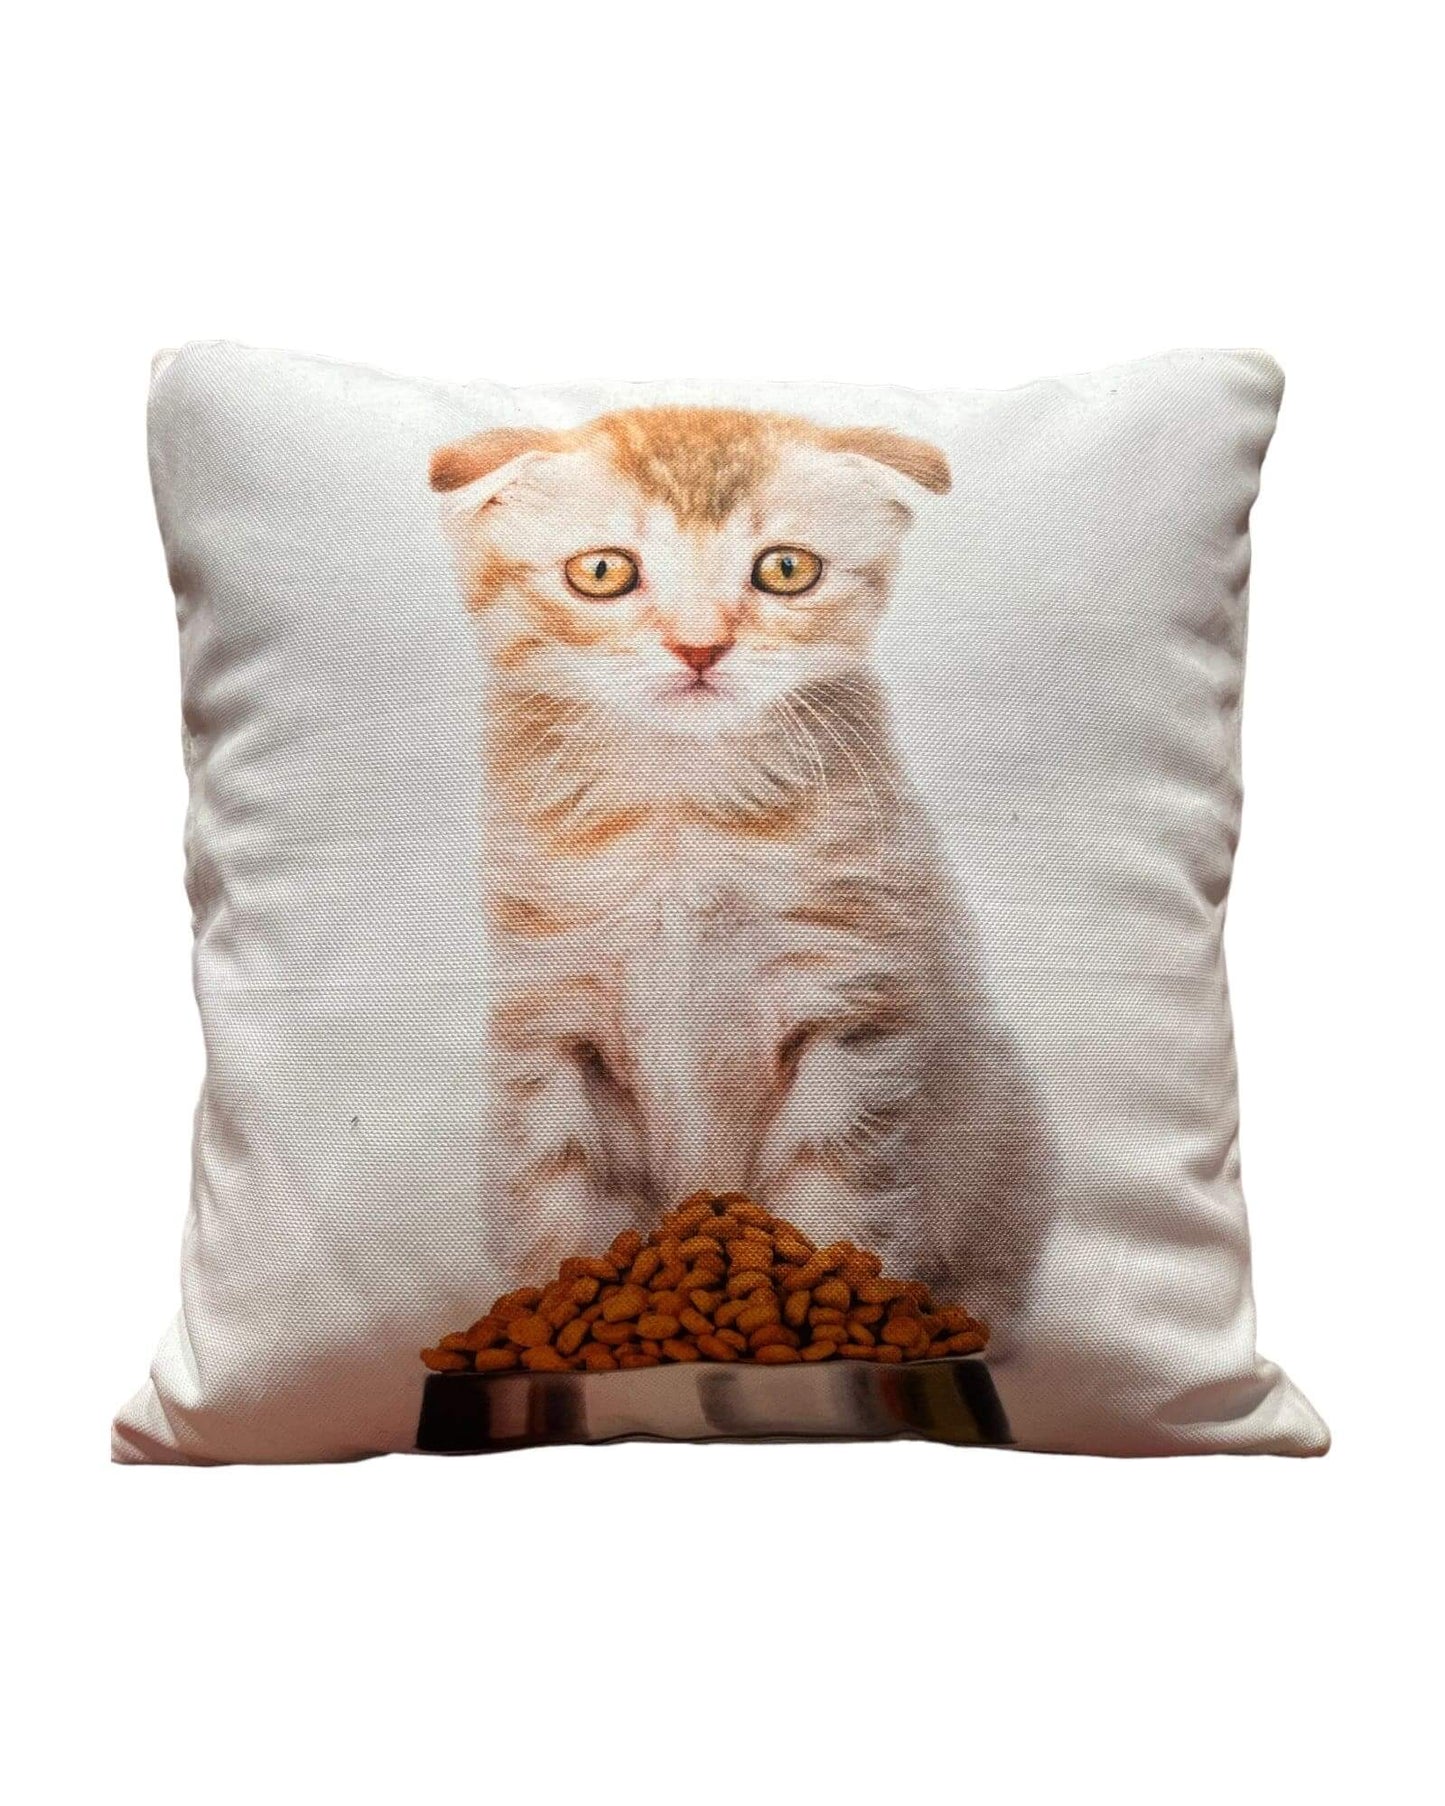 Cat Design Cushion (Lunch Time)